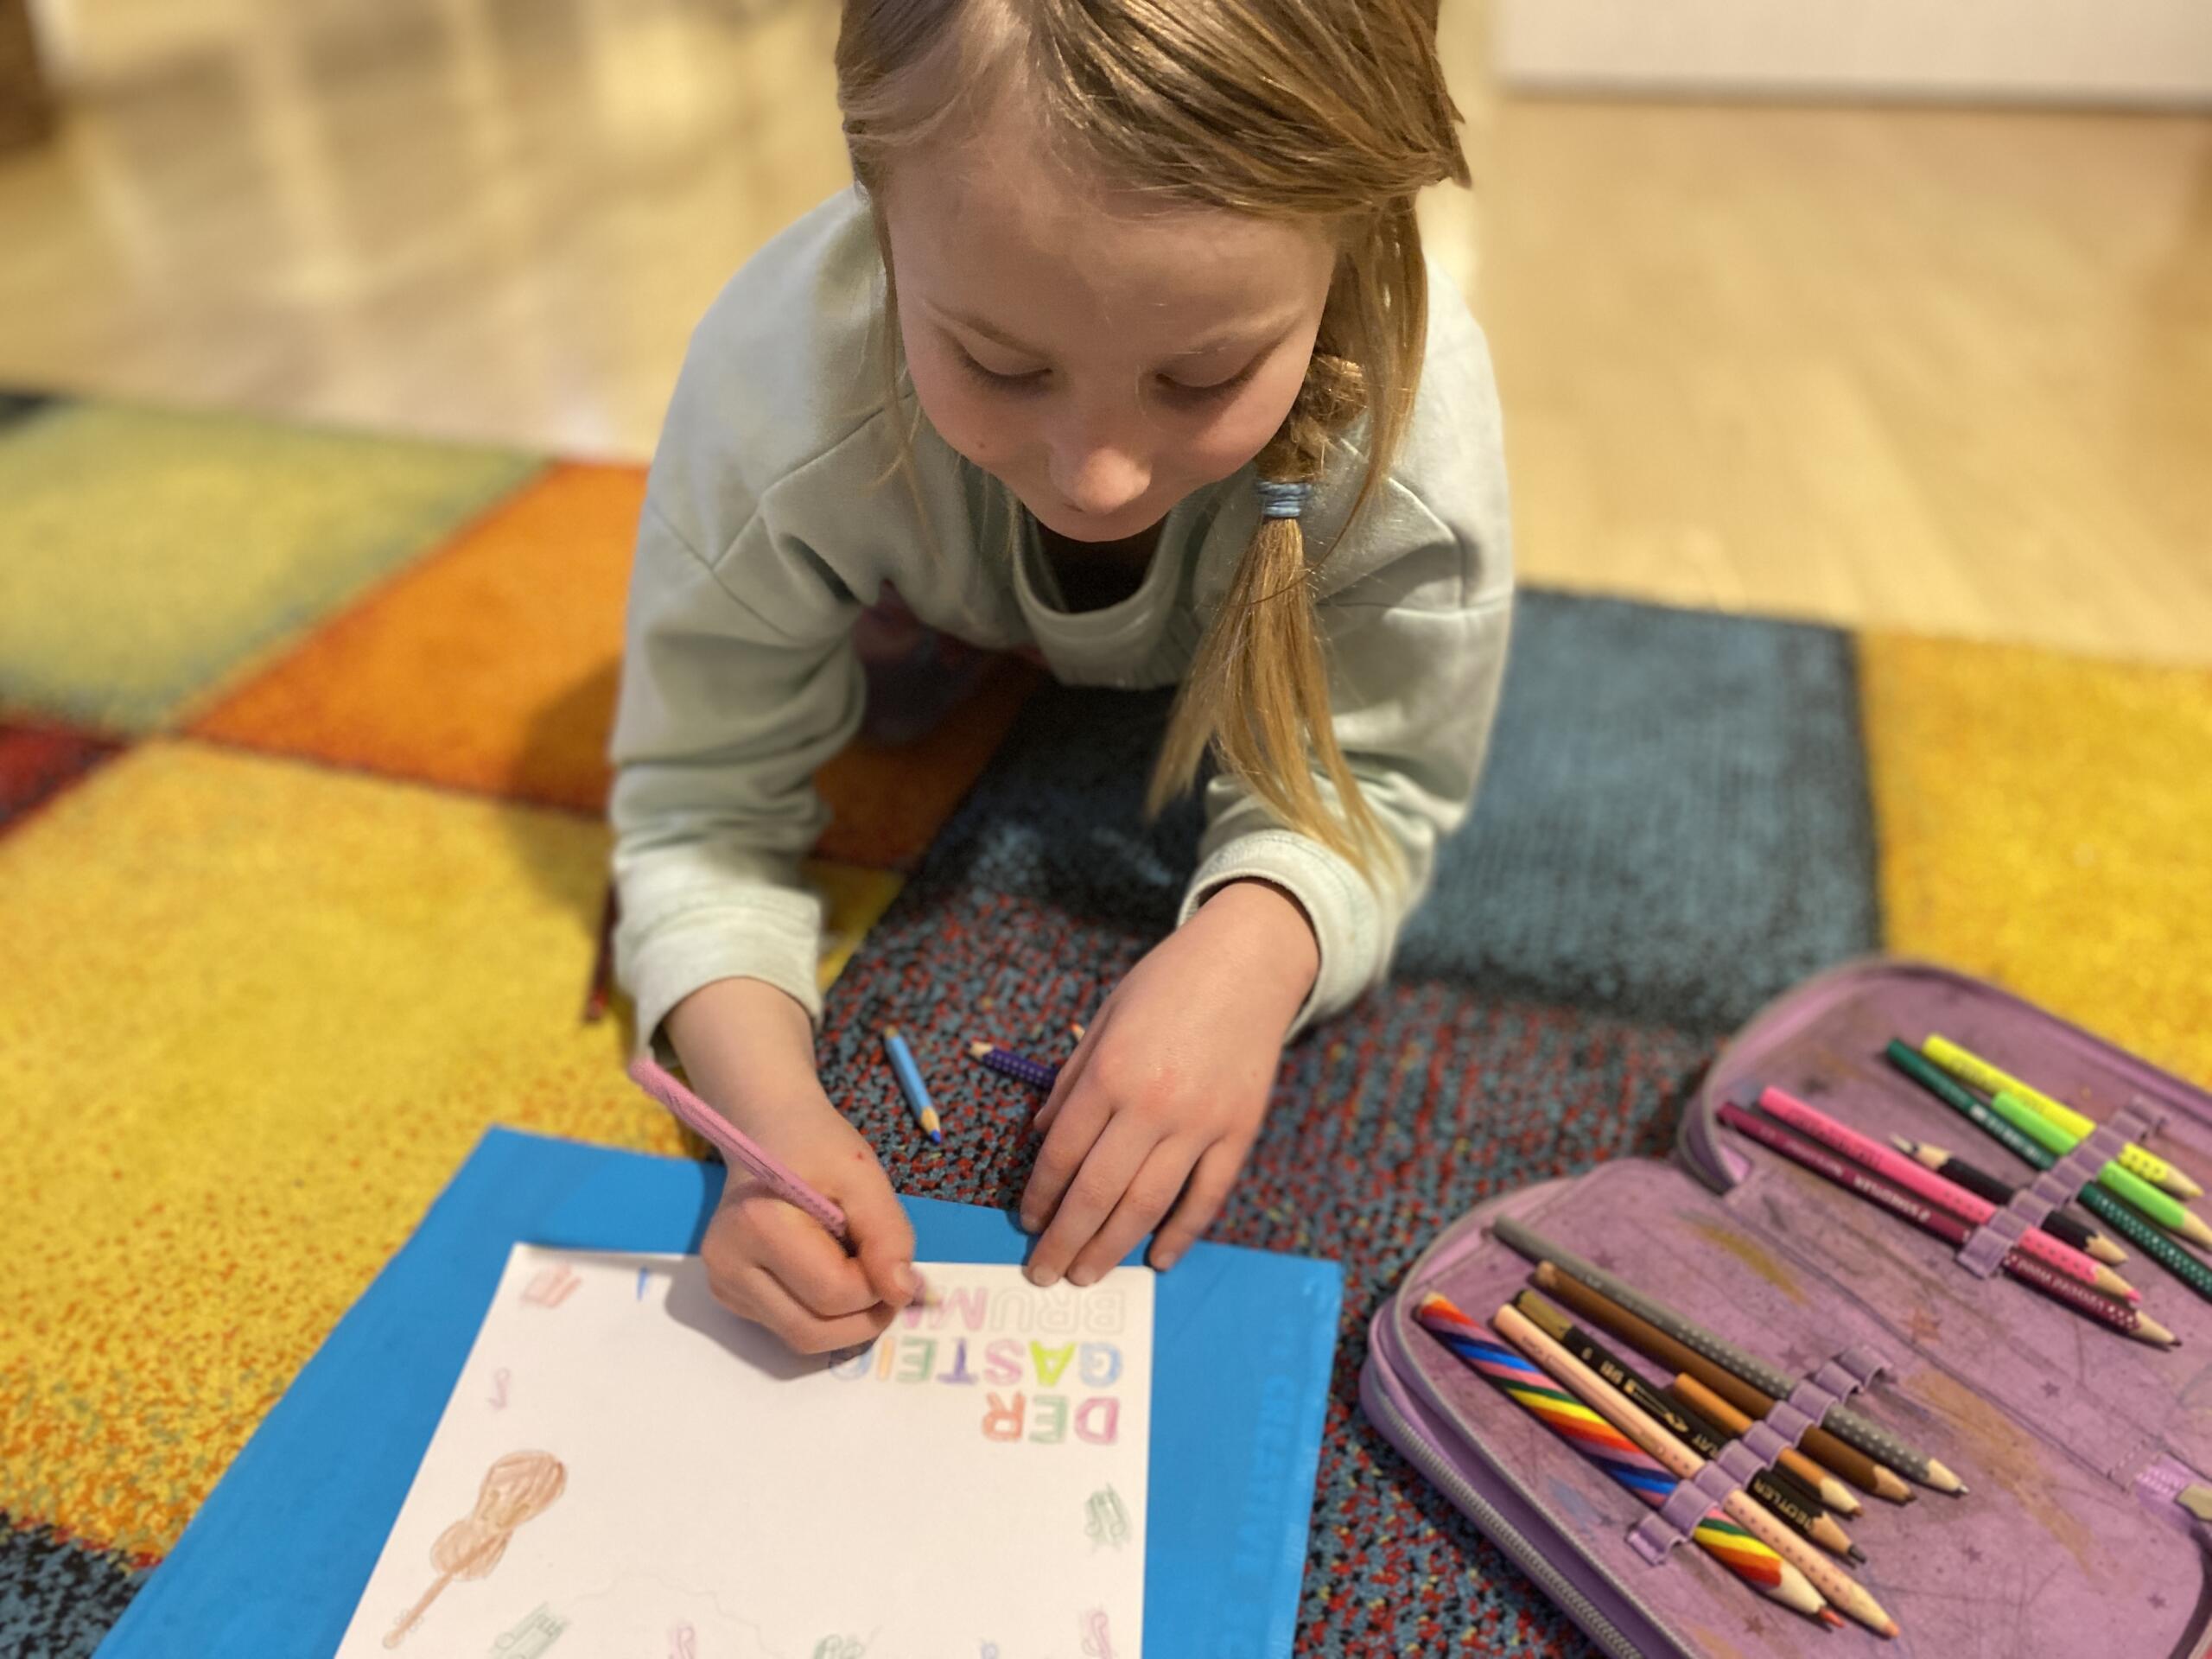 A girl lies on a colourful carpet and draws a Gasteig-brummt greetings card with coloured pencils.